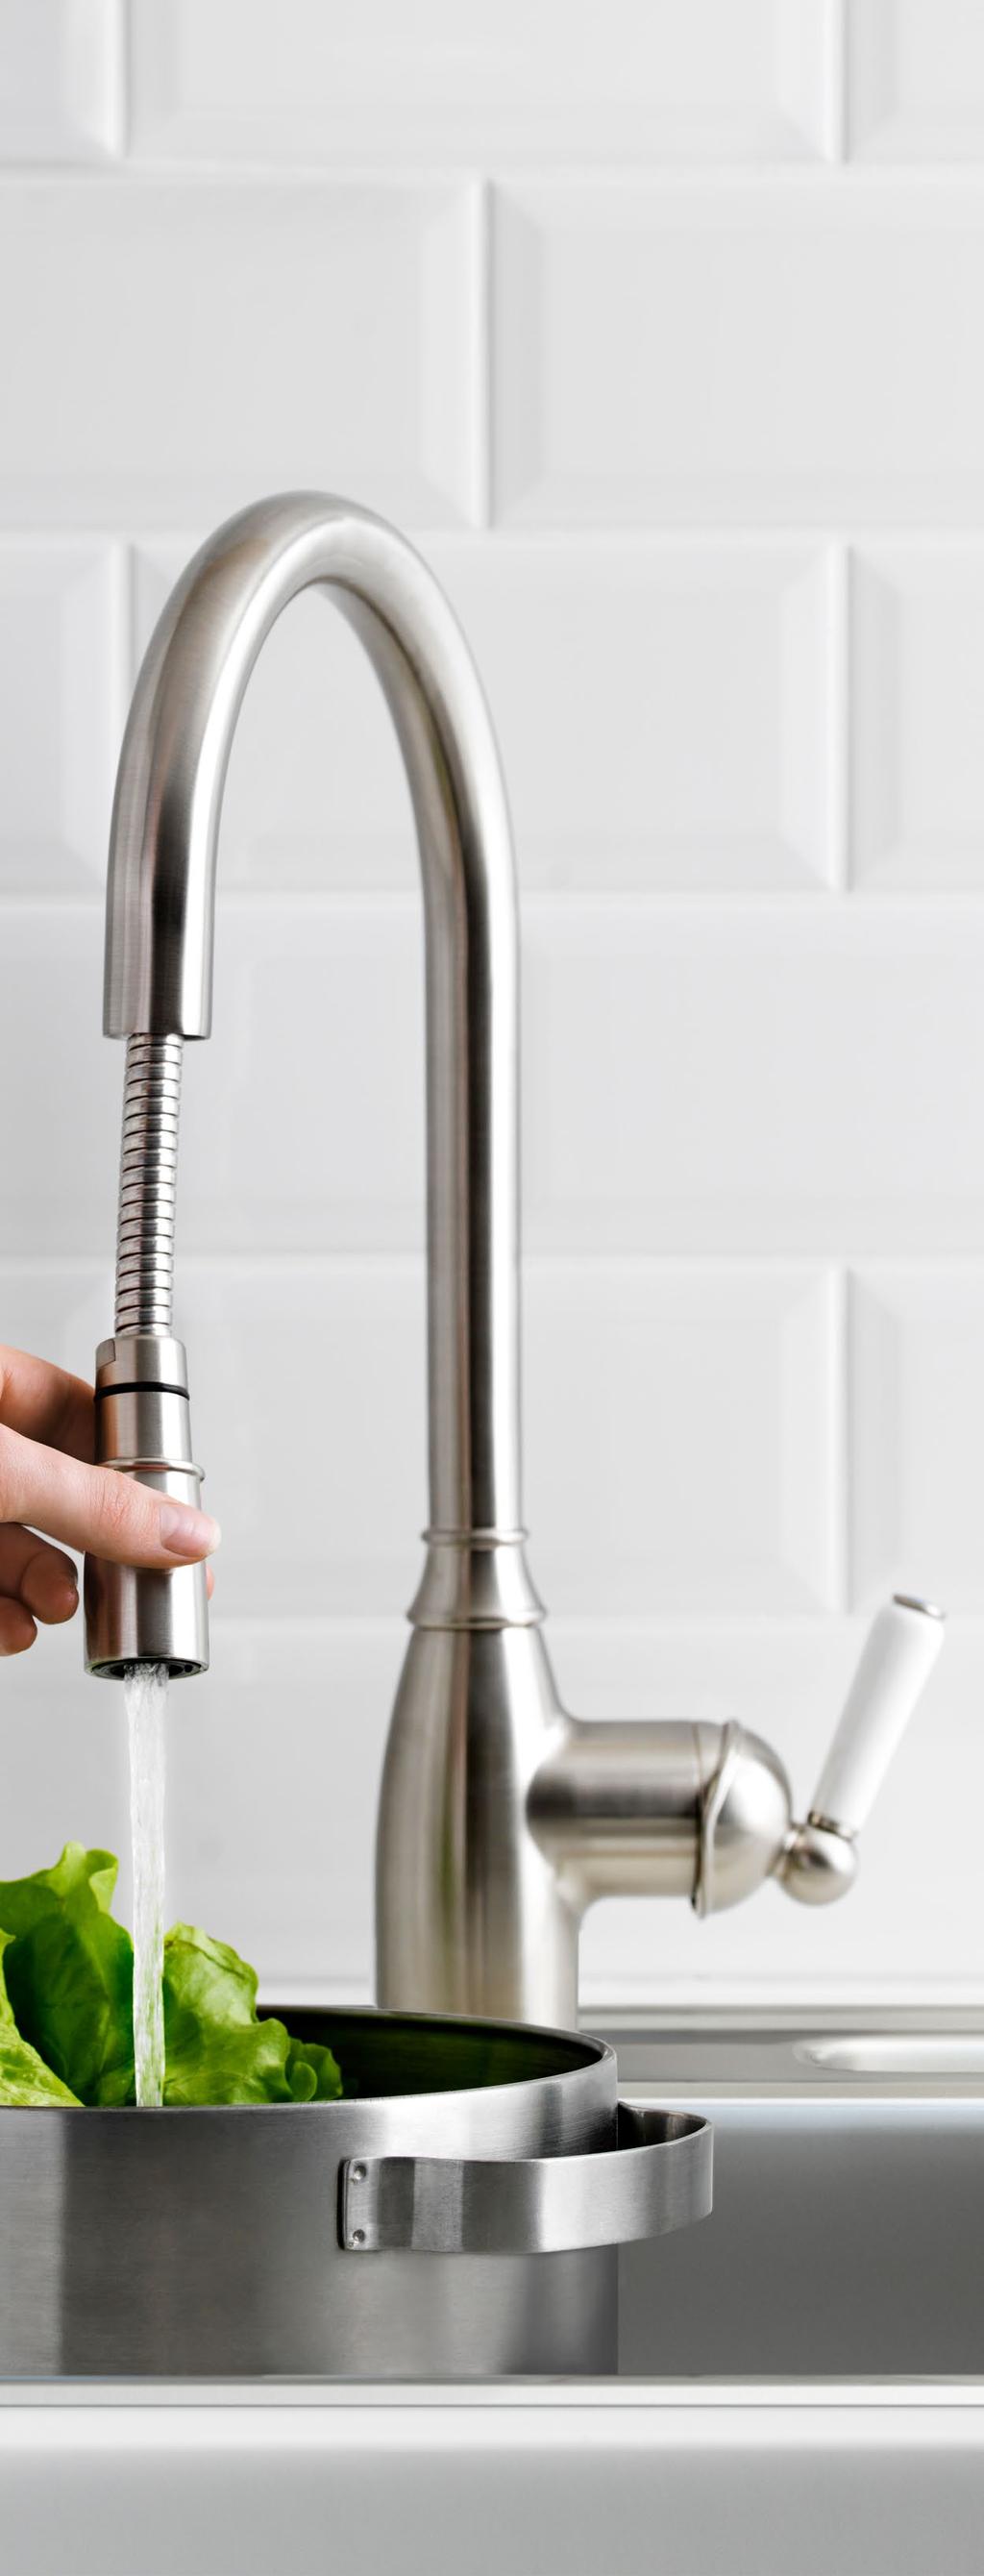 All our kitchen taps comply with European standards which mean that our taps are tested and approved for every market and fulfill every standard on the